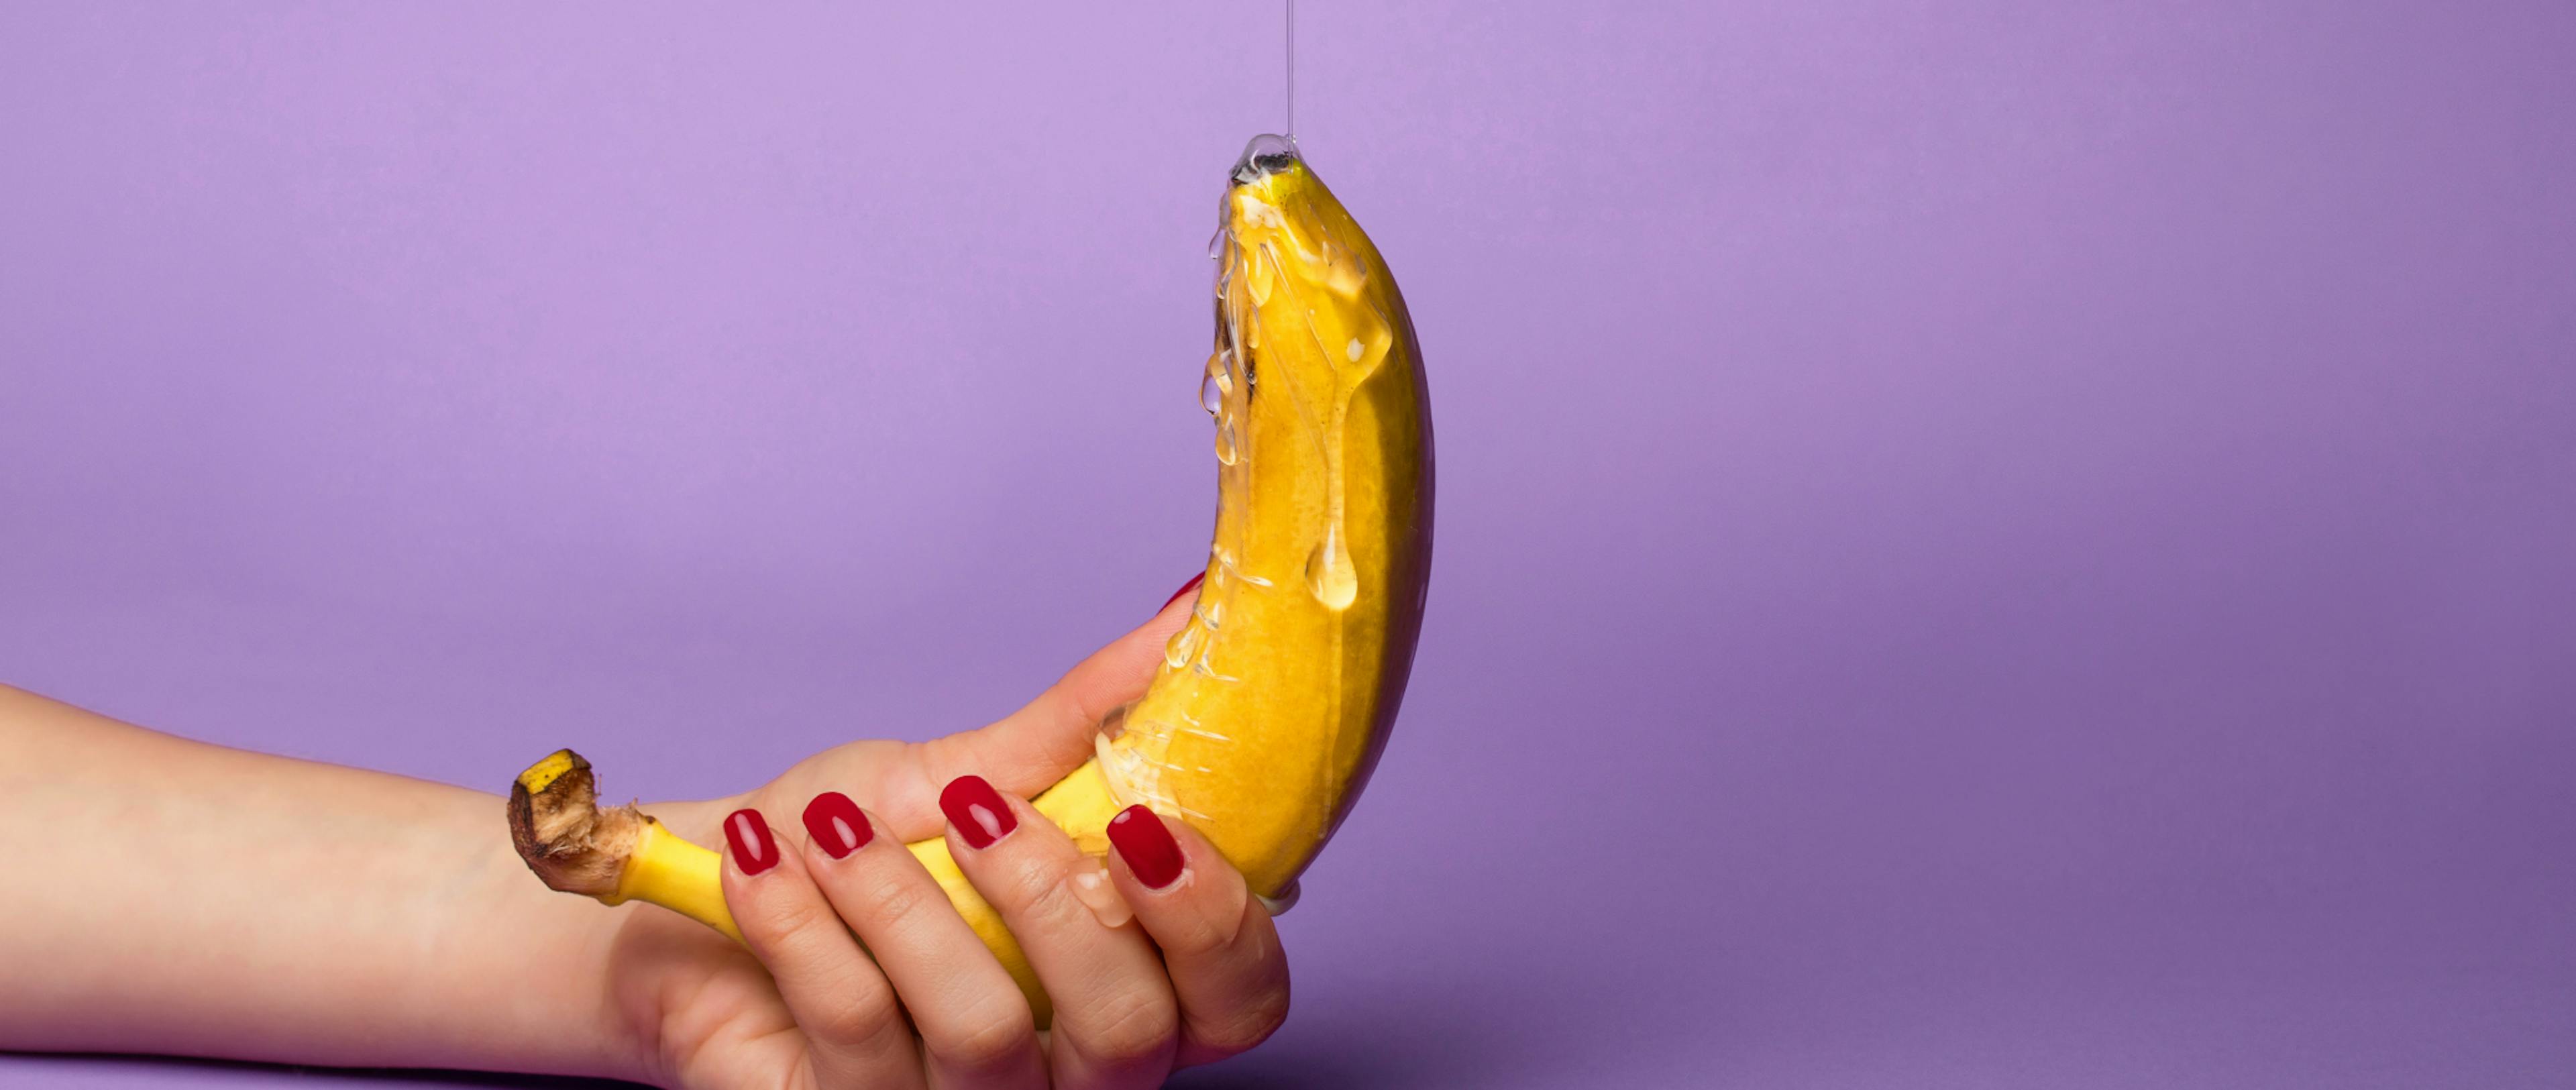 A woman holds the banana as lubricant falls on it.